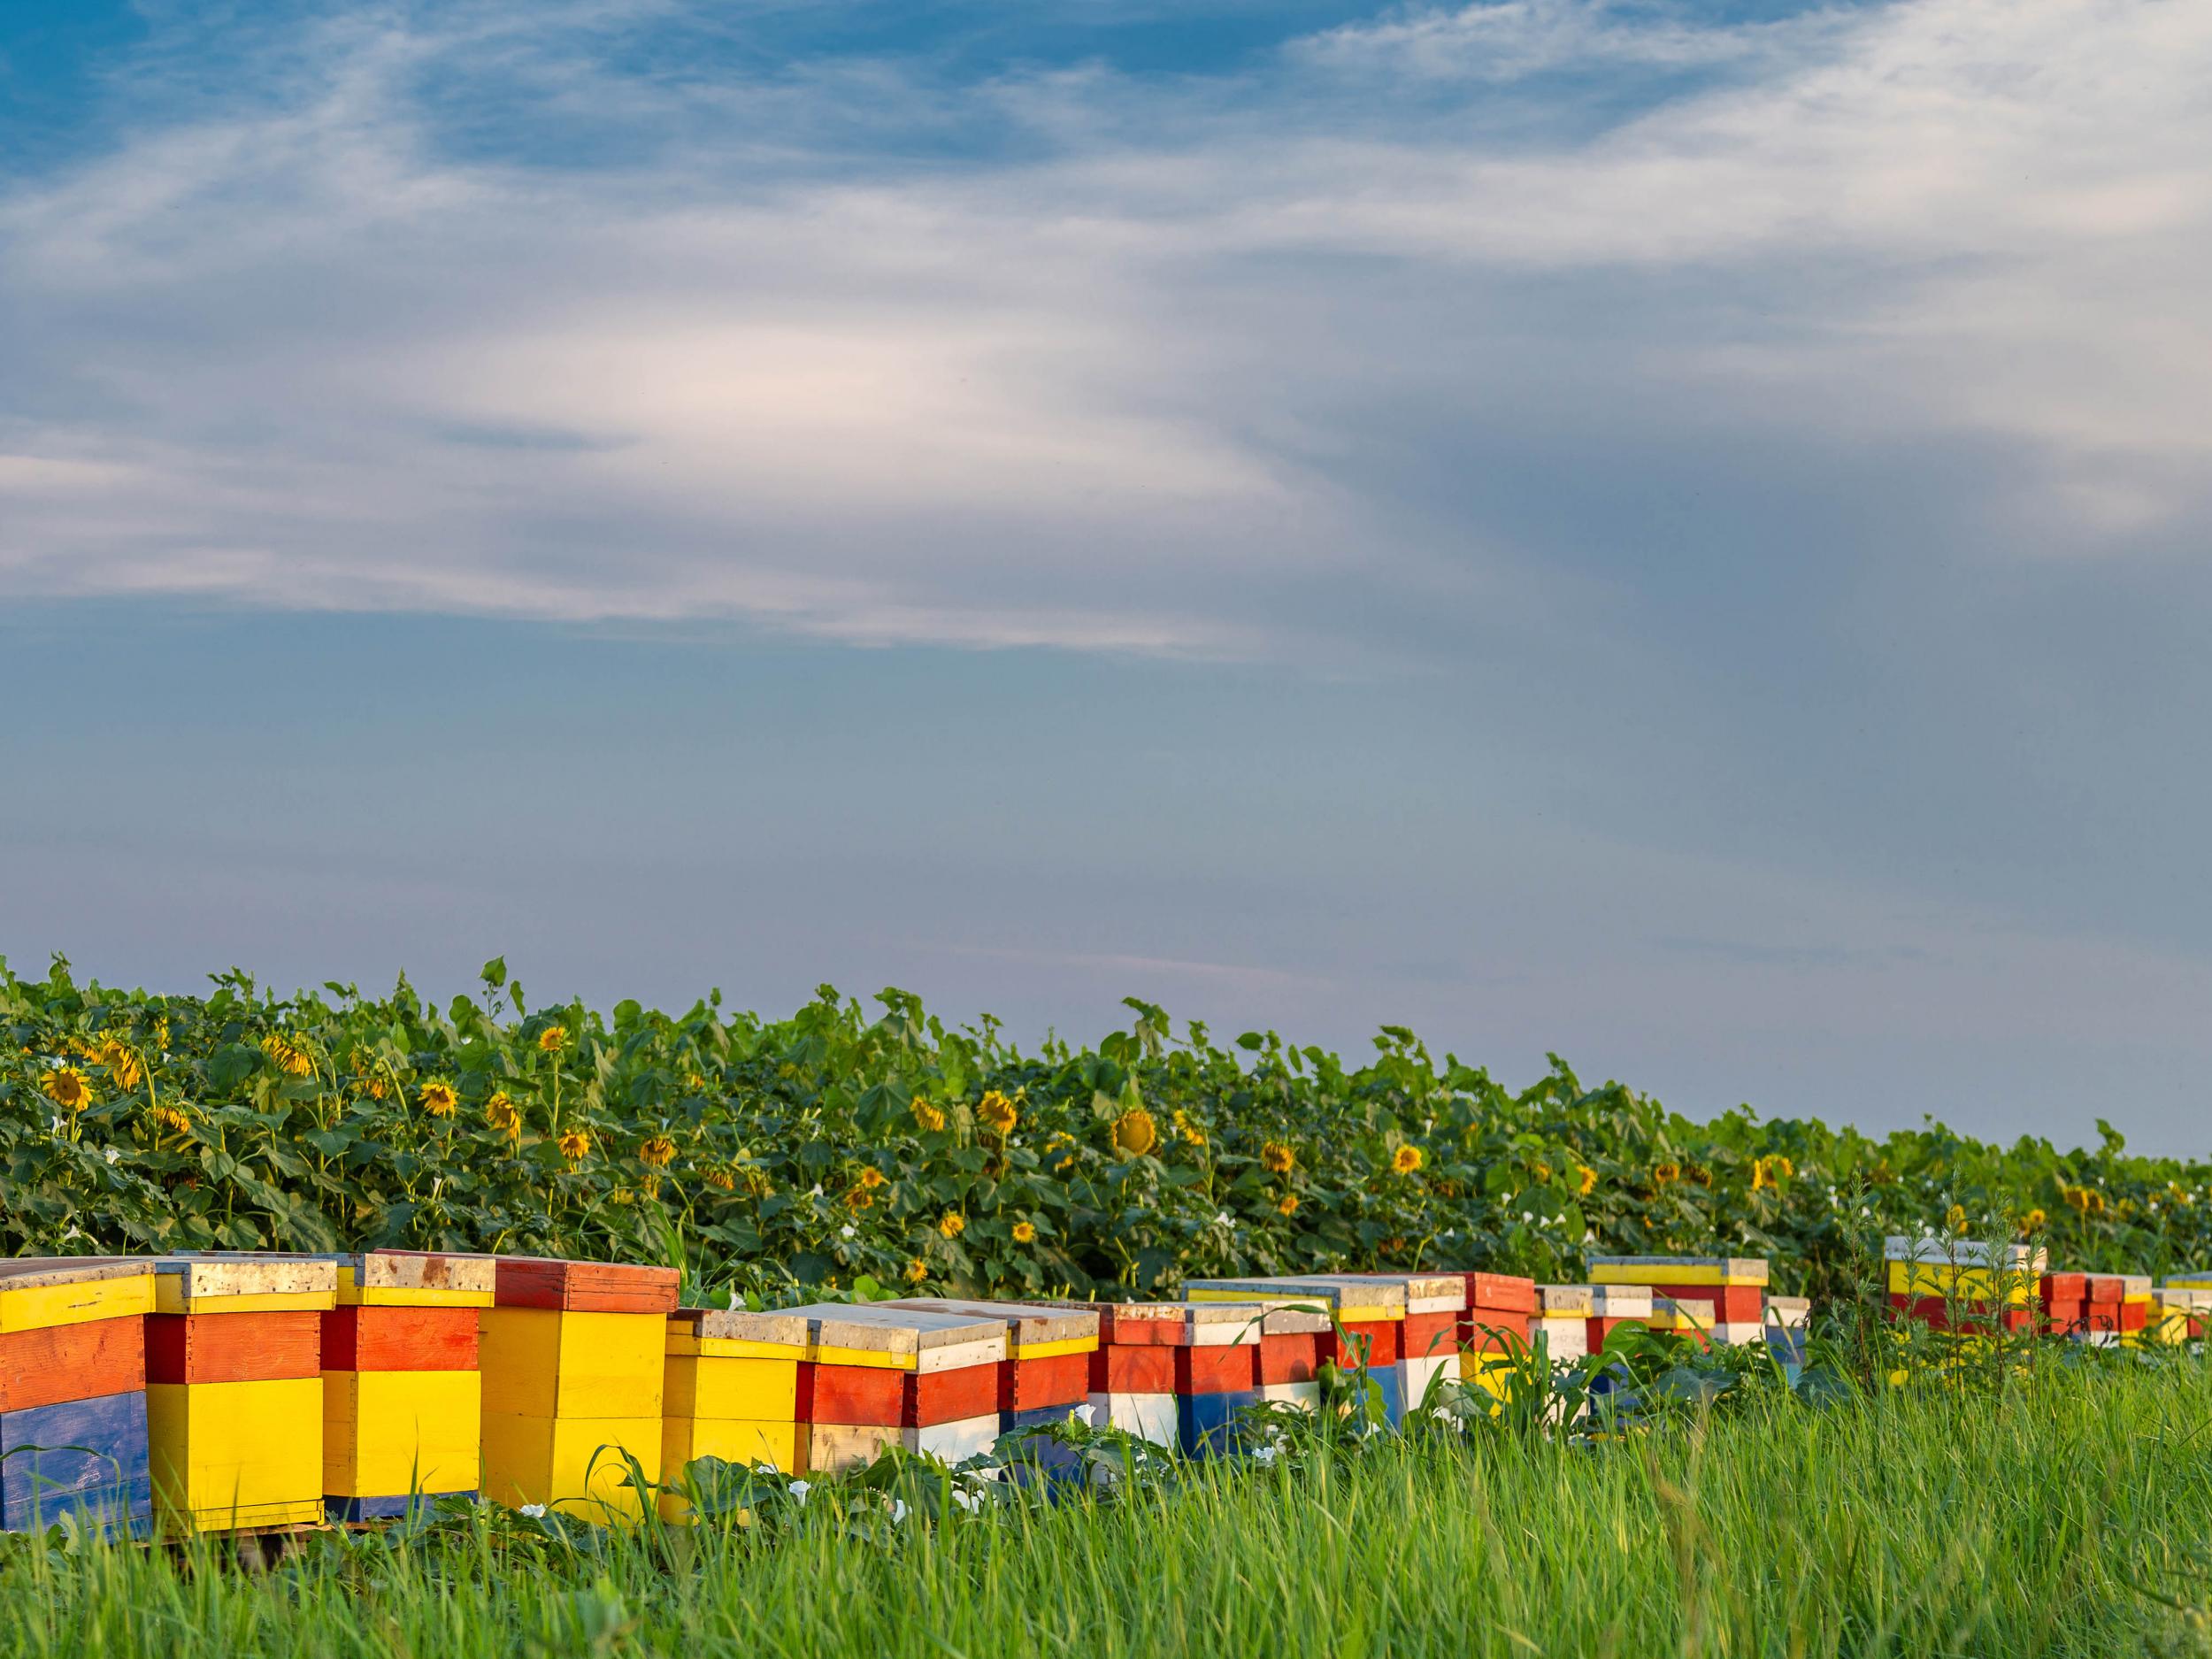 In the UK and elsewhere in the northern hemisphere, the beekeeping season is now in full swing